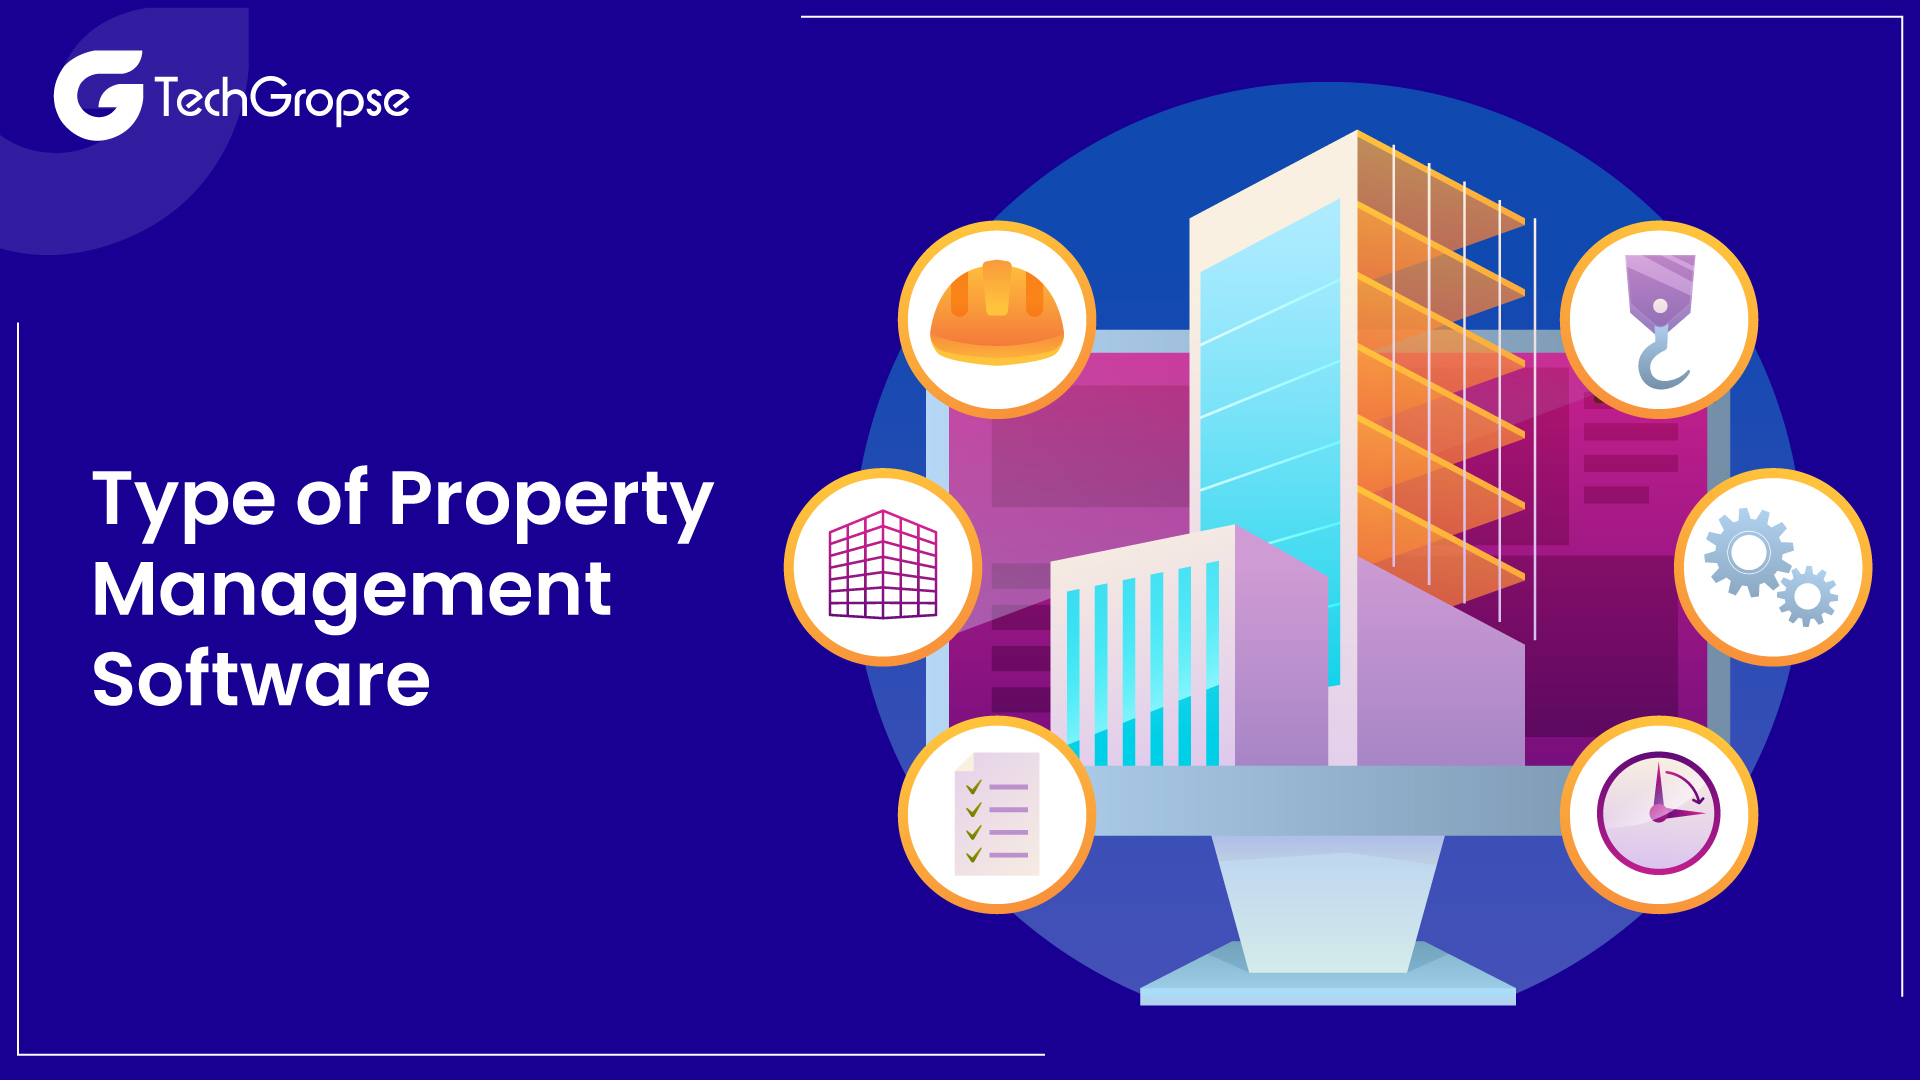 Type of Property Management Software